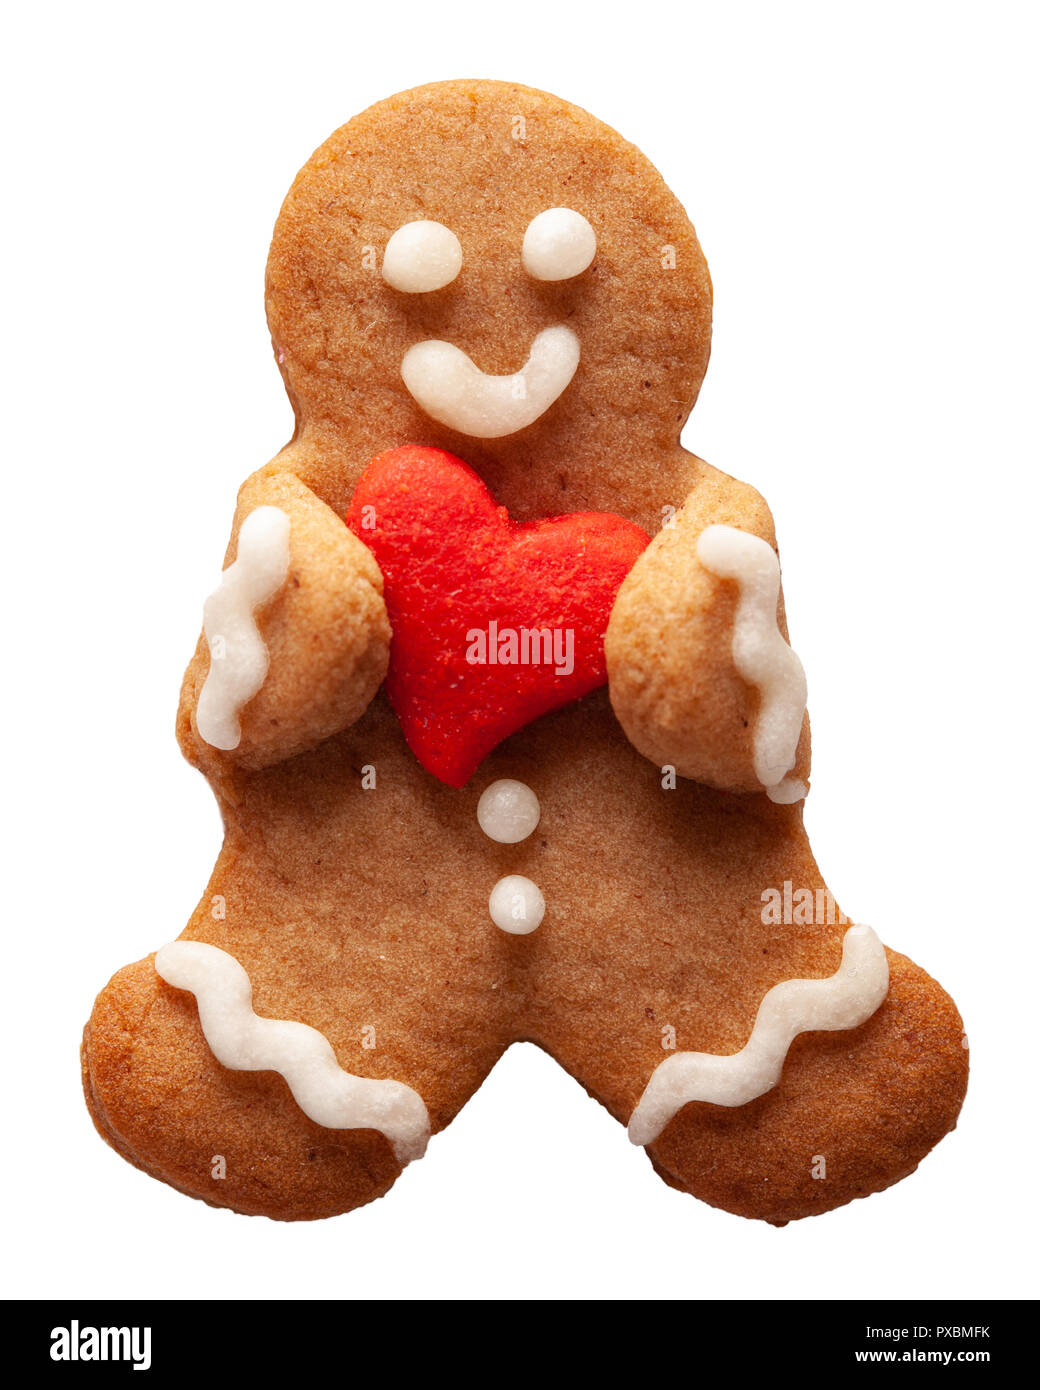 Gingerbread man with heart decoration for valentine day Stock Photo